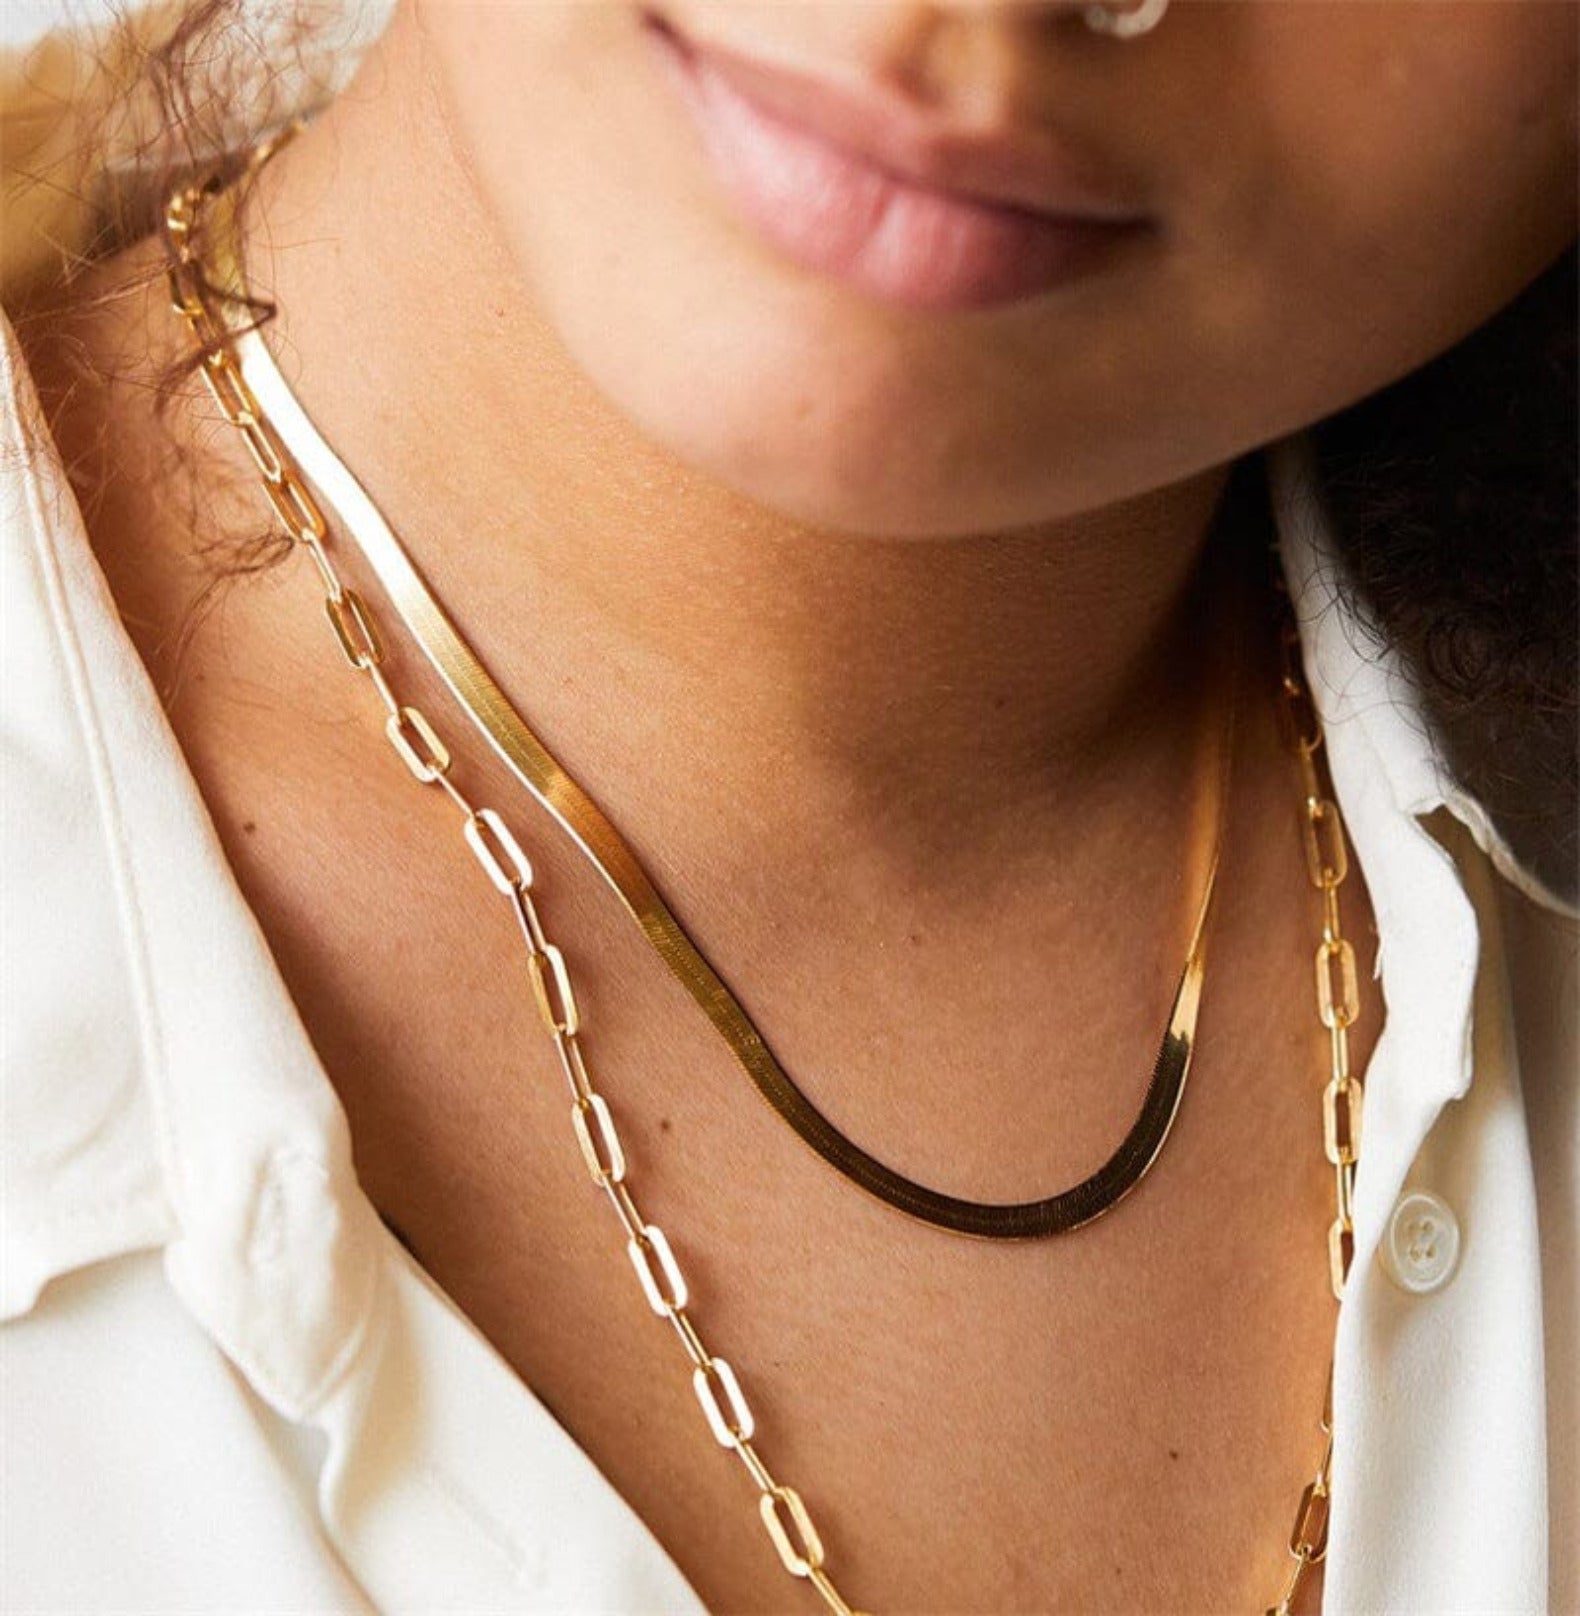 ?????????????????????Simple Layered Necklace Double Layered Necklace braclet Yubama Jewelry Online Store - The Elegant Designs of Gold and Silver ! 